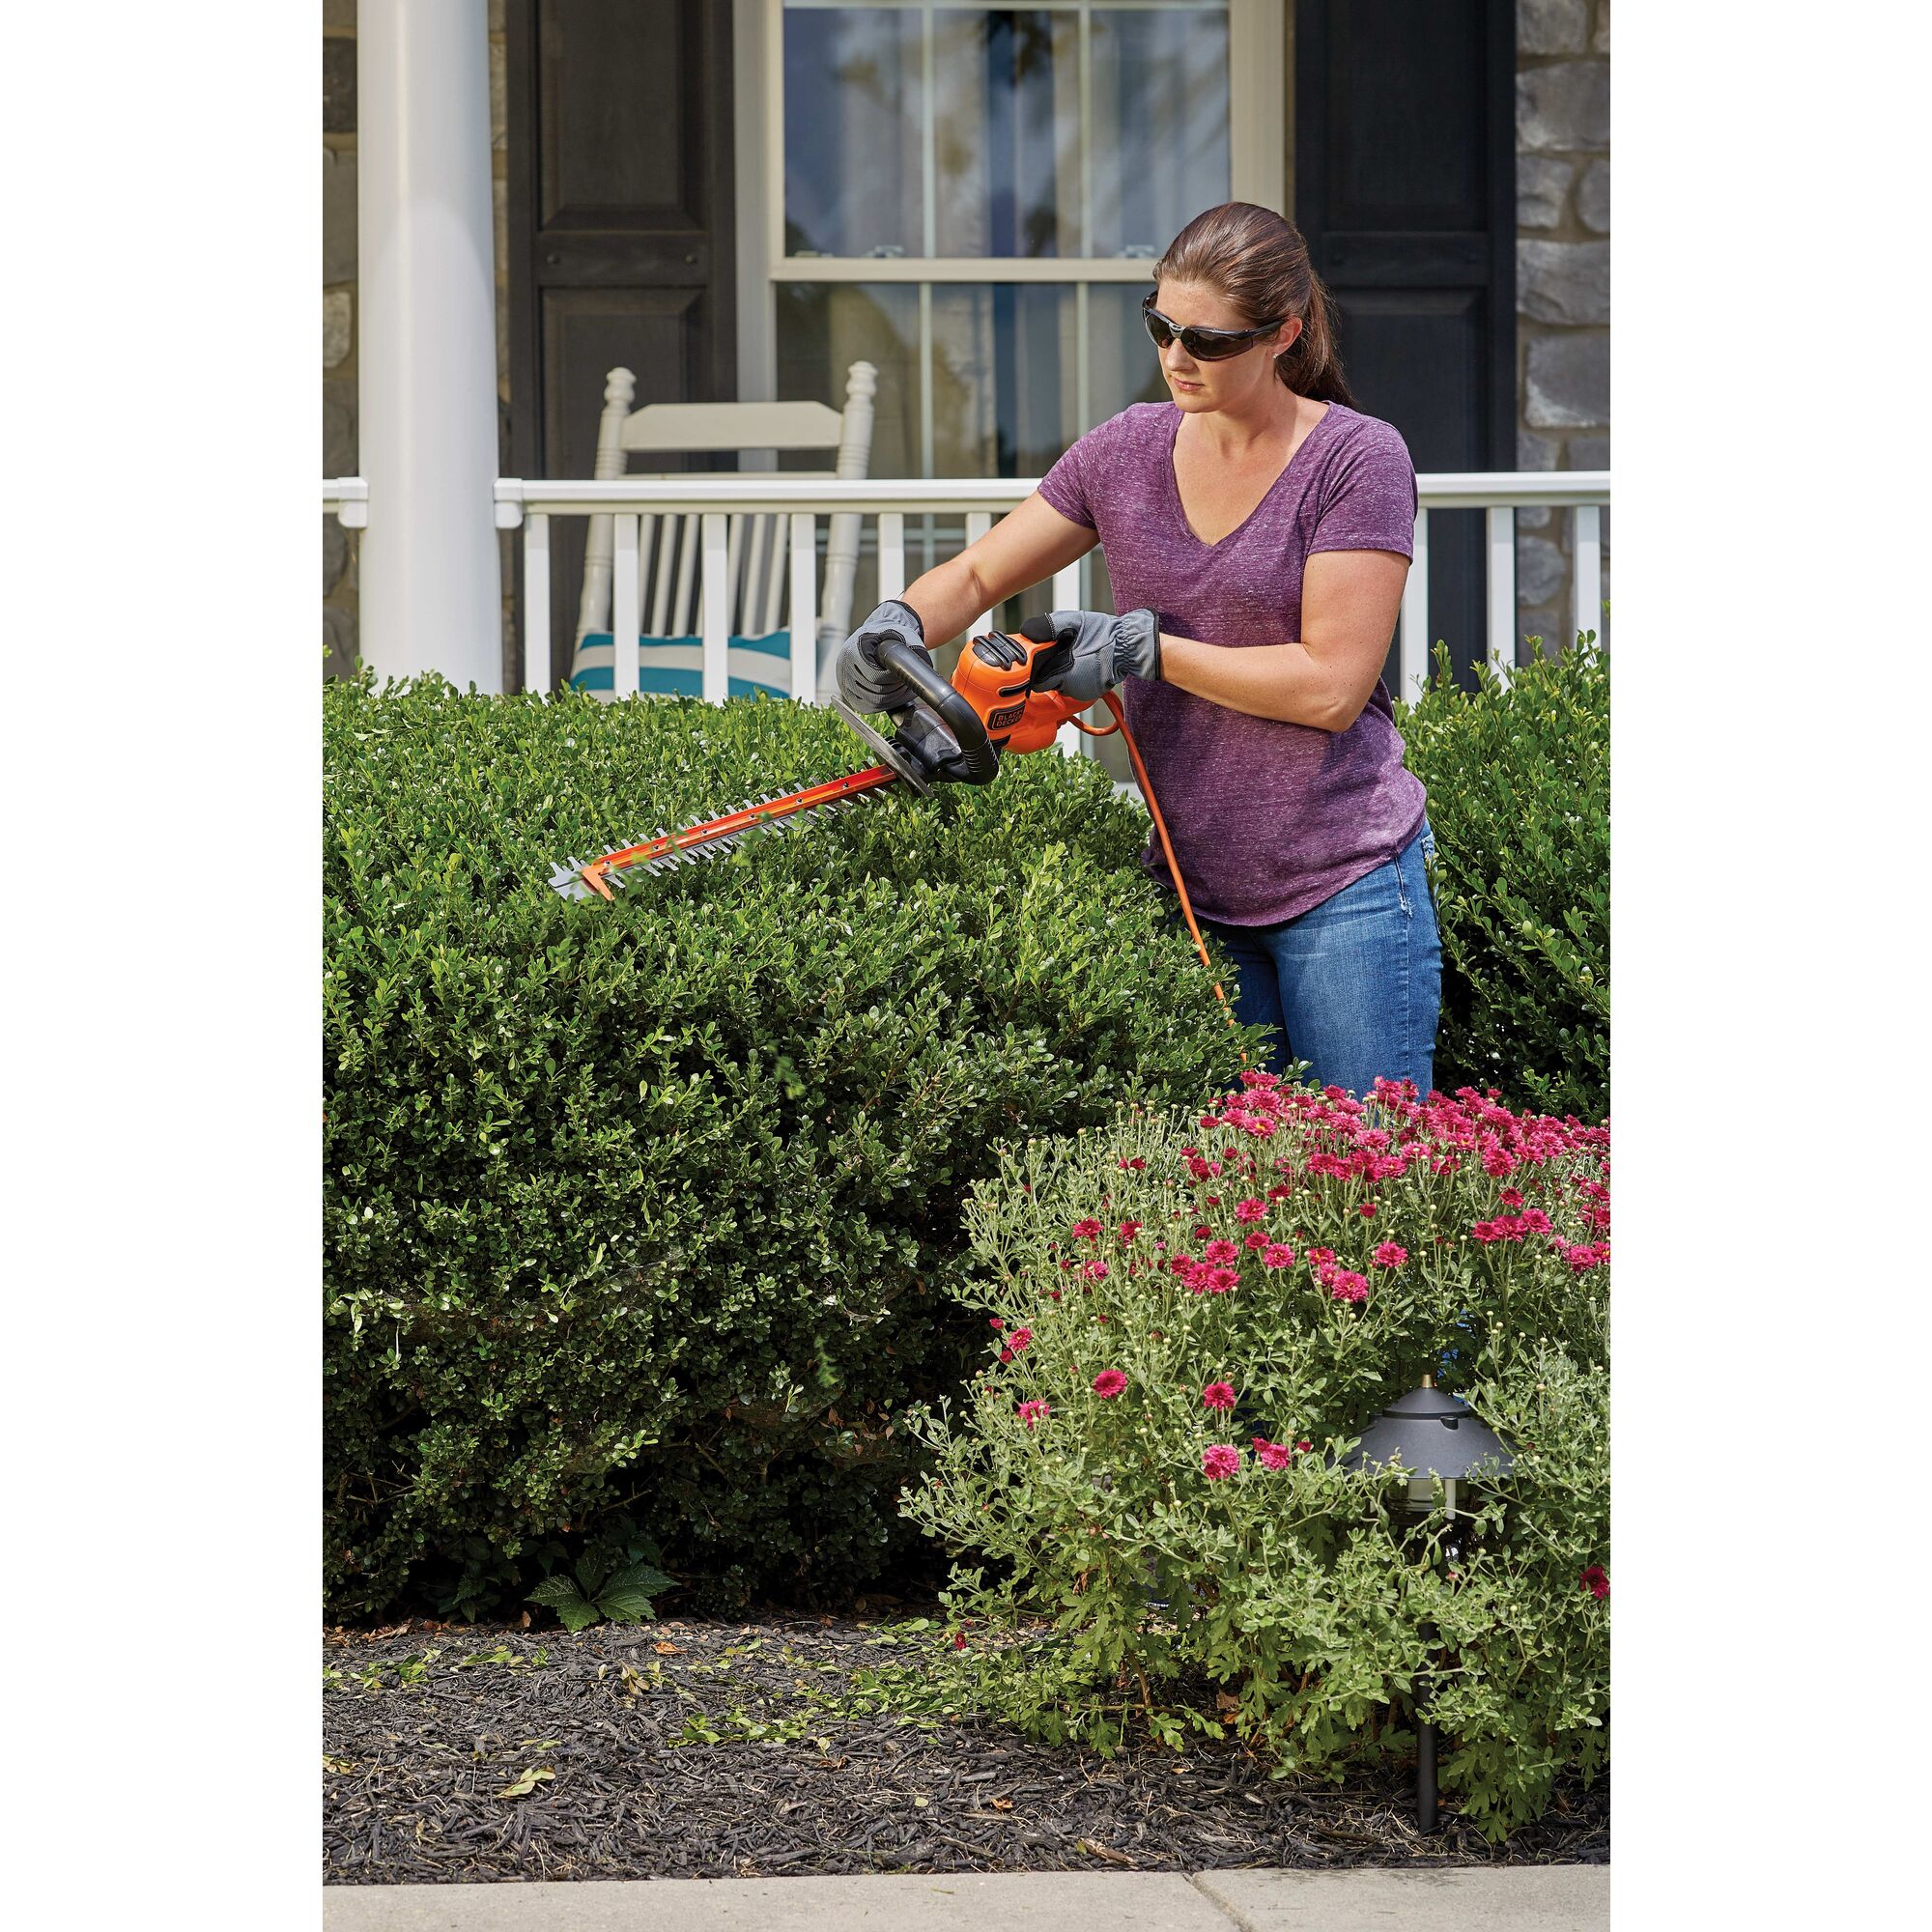 22 inch SAW BLADE Electric Hedge Trimmer being used by a person on a hedge.